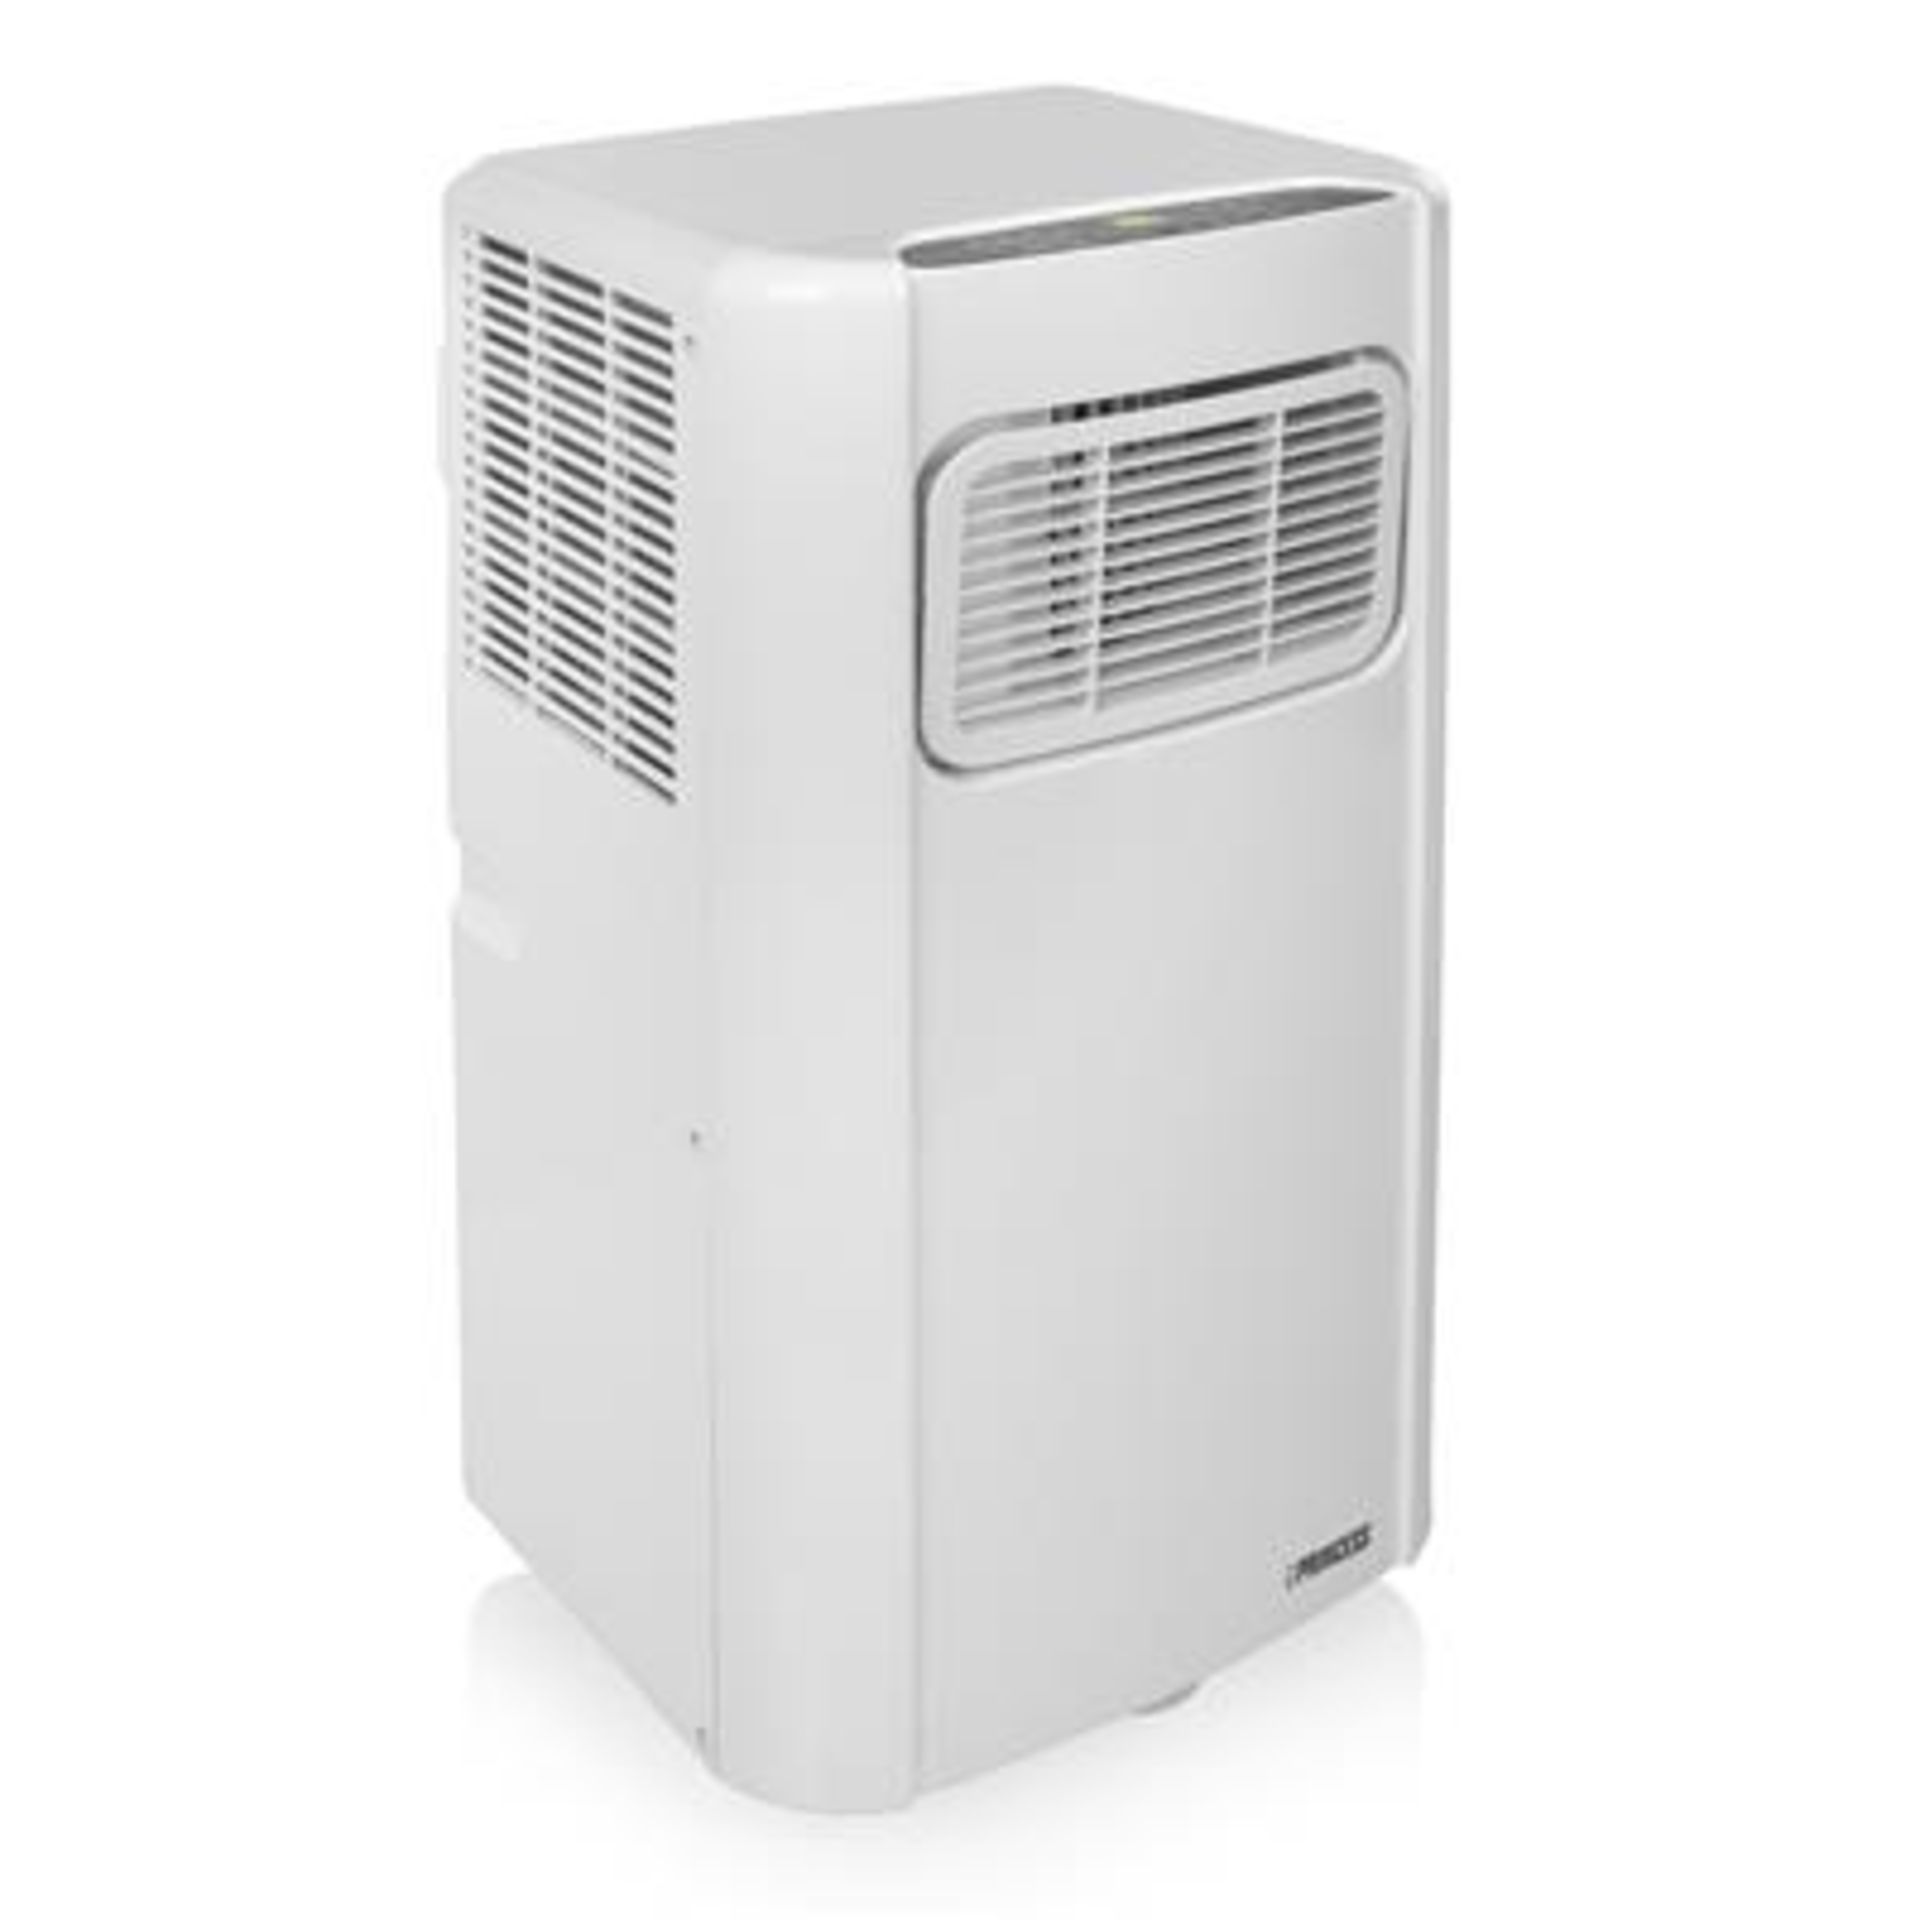 PALLET TO CONTAIN 6 x PRINCESS MOBILE AIR CONDITIONER 7000BTU, 785W, A ENERGY RATED RRP £299.99 - Image 2 of 2